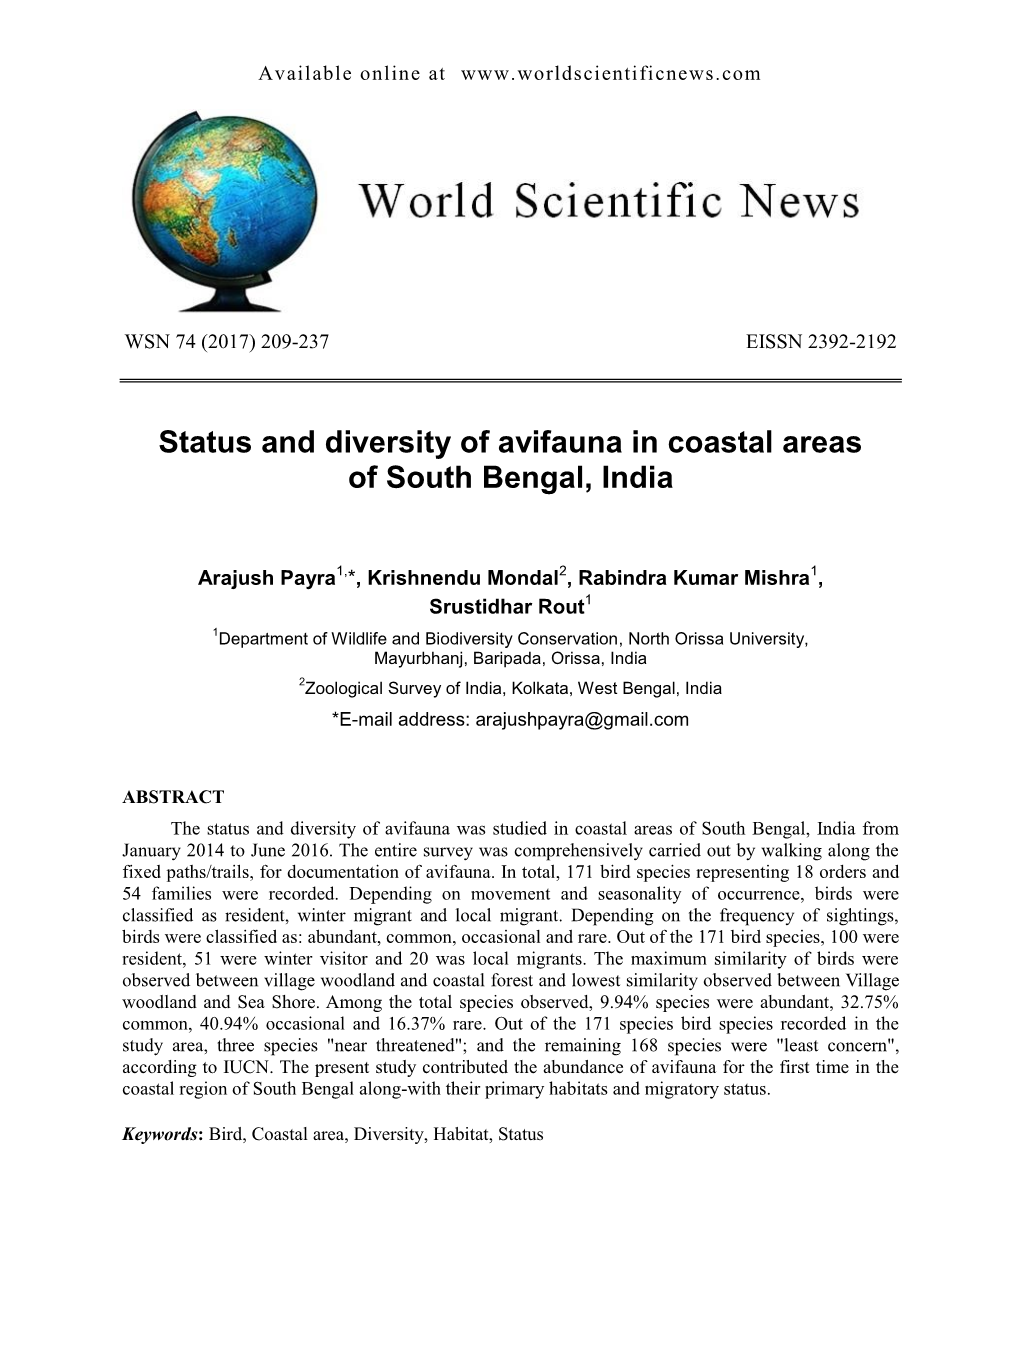 Status and Diversity of Avifauna in Coastal Areas of South Bengal, India